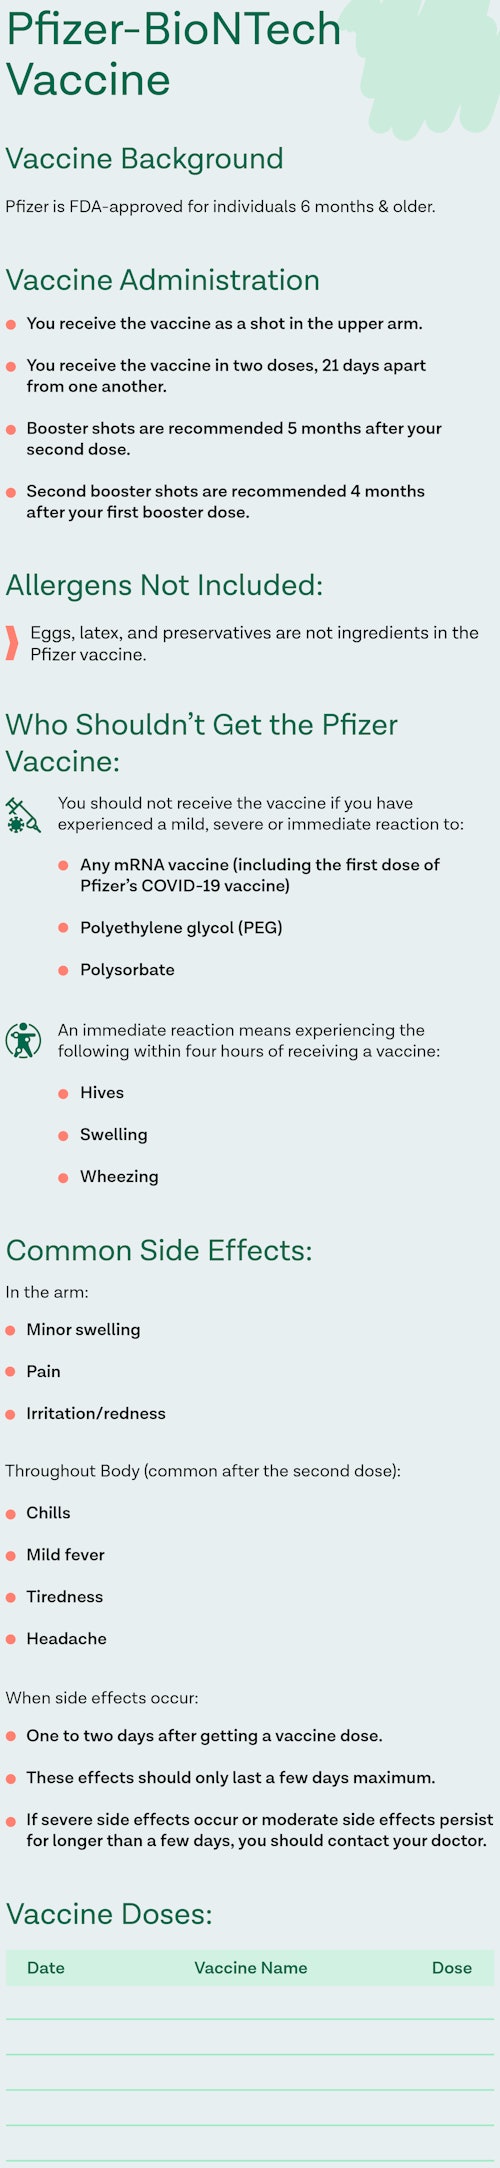 Infographic breaking down must-know information on the Pfizer COVID-19 Vaccine.